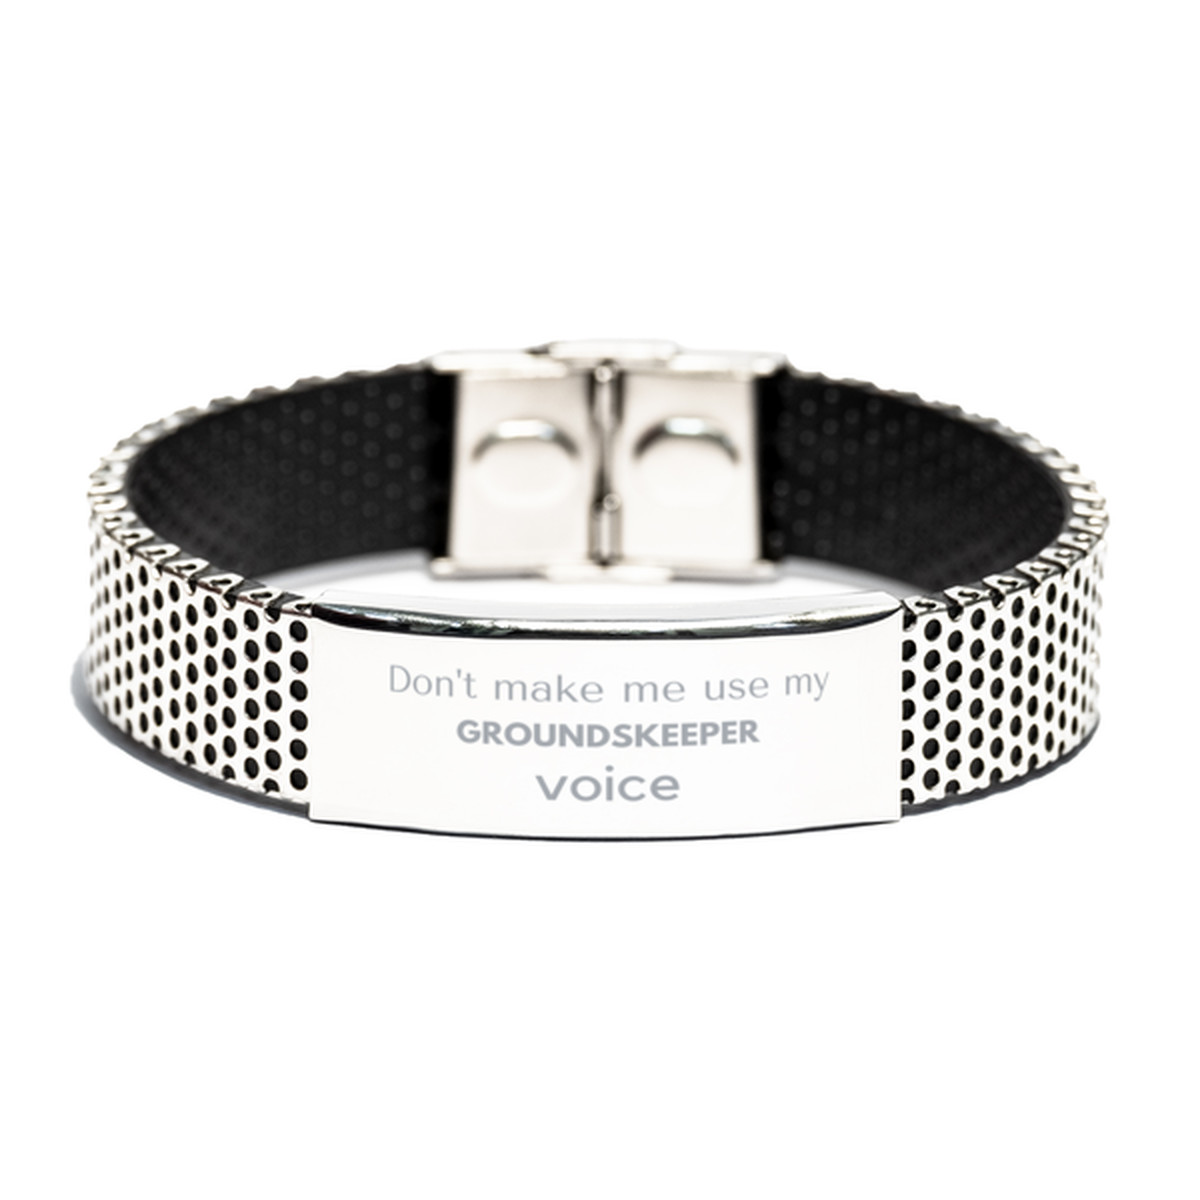 Don't make me use my Groundskeeper voice, Sarcasm Groundskeeper Gifts, Christmas Groundskeeper Stainless Steel Bracelet Birthday Unique Gifts For Groundskeeper Coworkers, Men, Women, Colleague, Friends